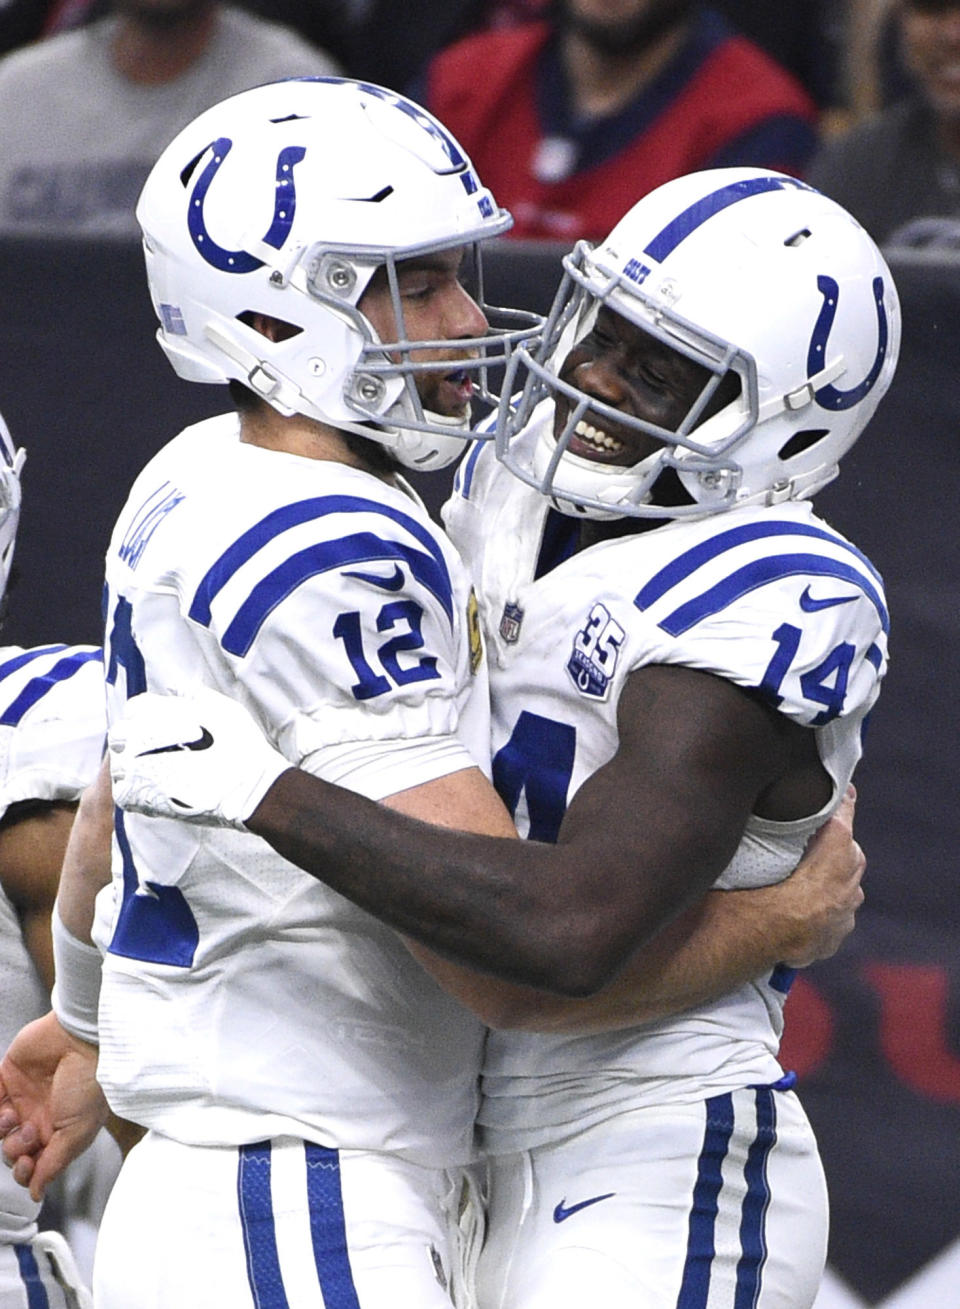 Indianapolis Colts wide receiver Zach Pascal (14) celebrates with quarterback Andrew Luck (12) after catching a pass for a touchdown against the Houston Texans during the second half of an NFL football game Sunday, Dec. 9, 2018, in Houston. (AP Photo/Eric Christian Smith)